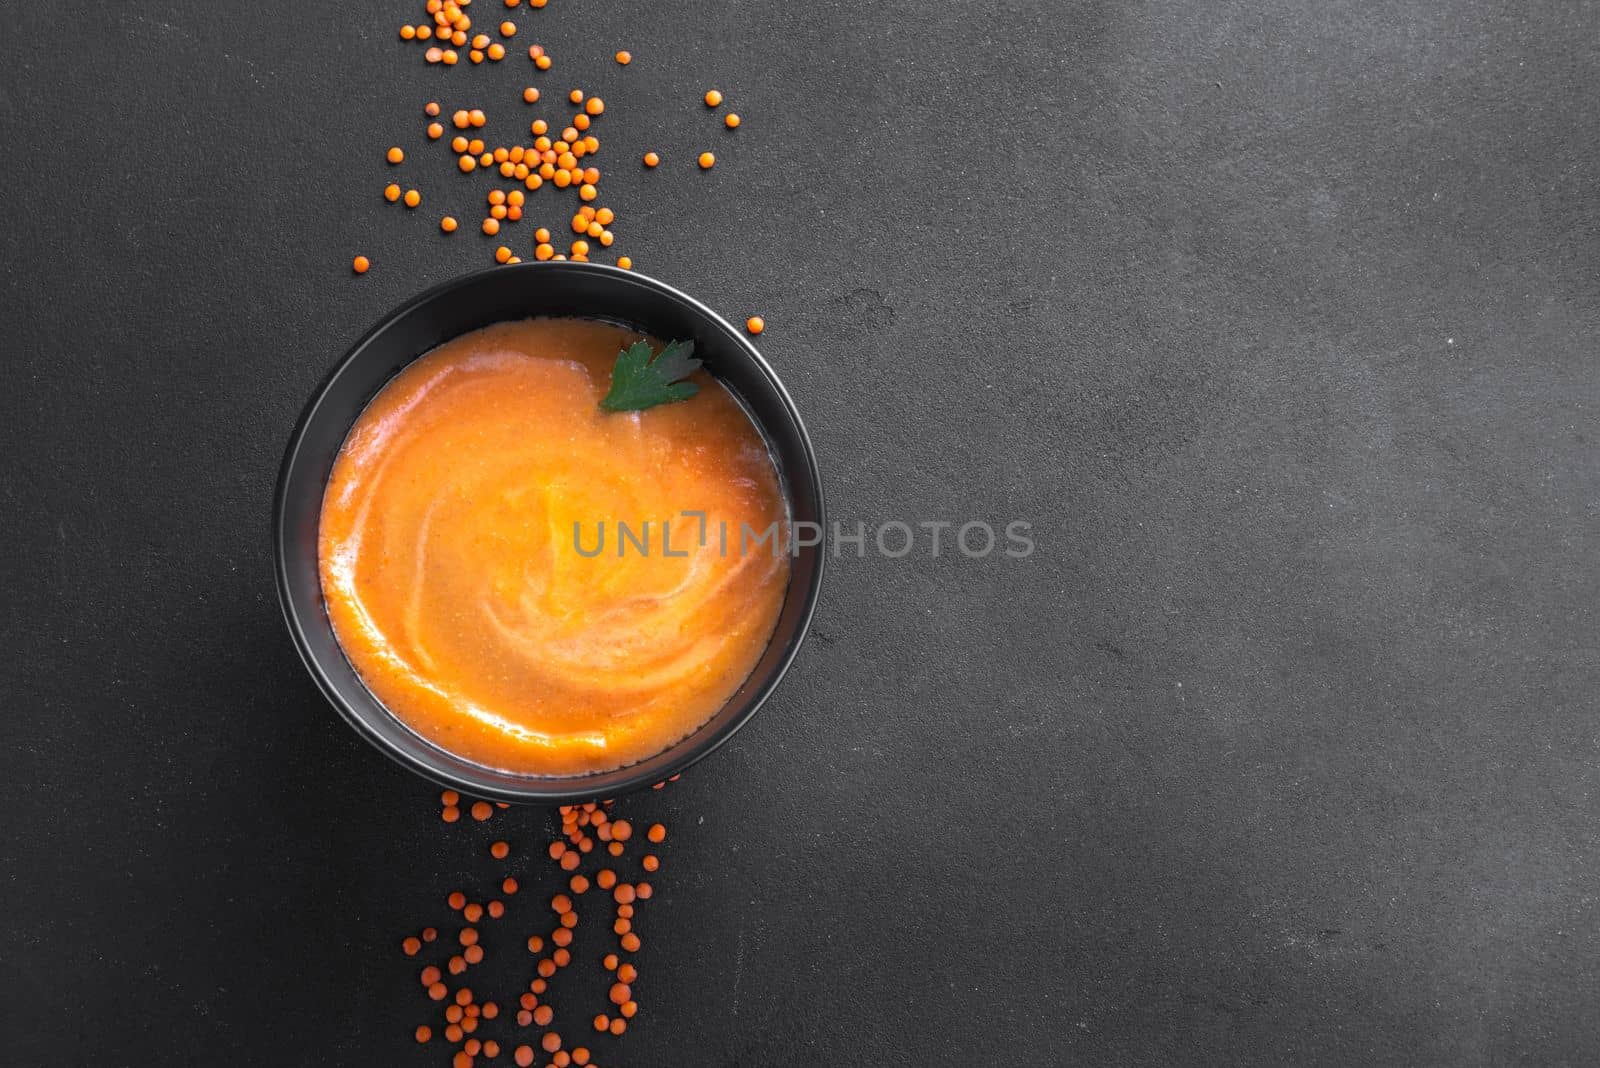 Mashed red lentil soup on a dark background view from above. Copy space for text, writing the recipe, ingredients.